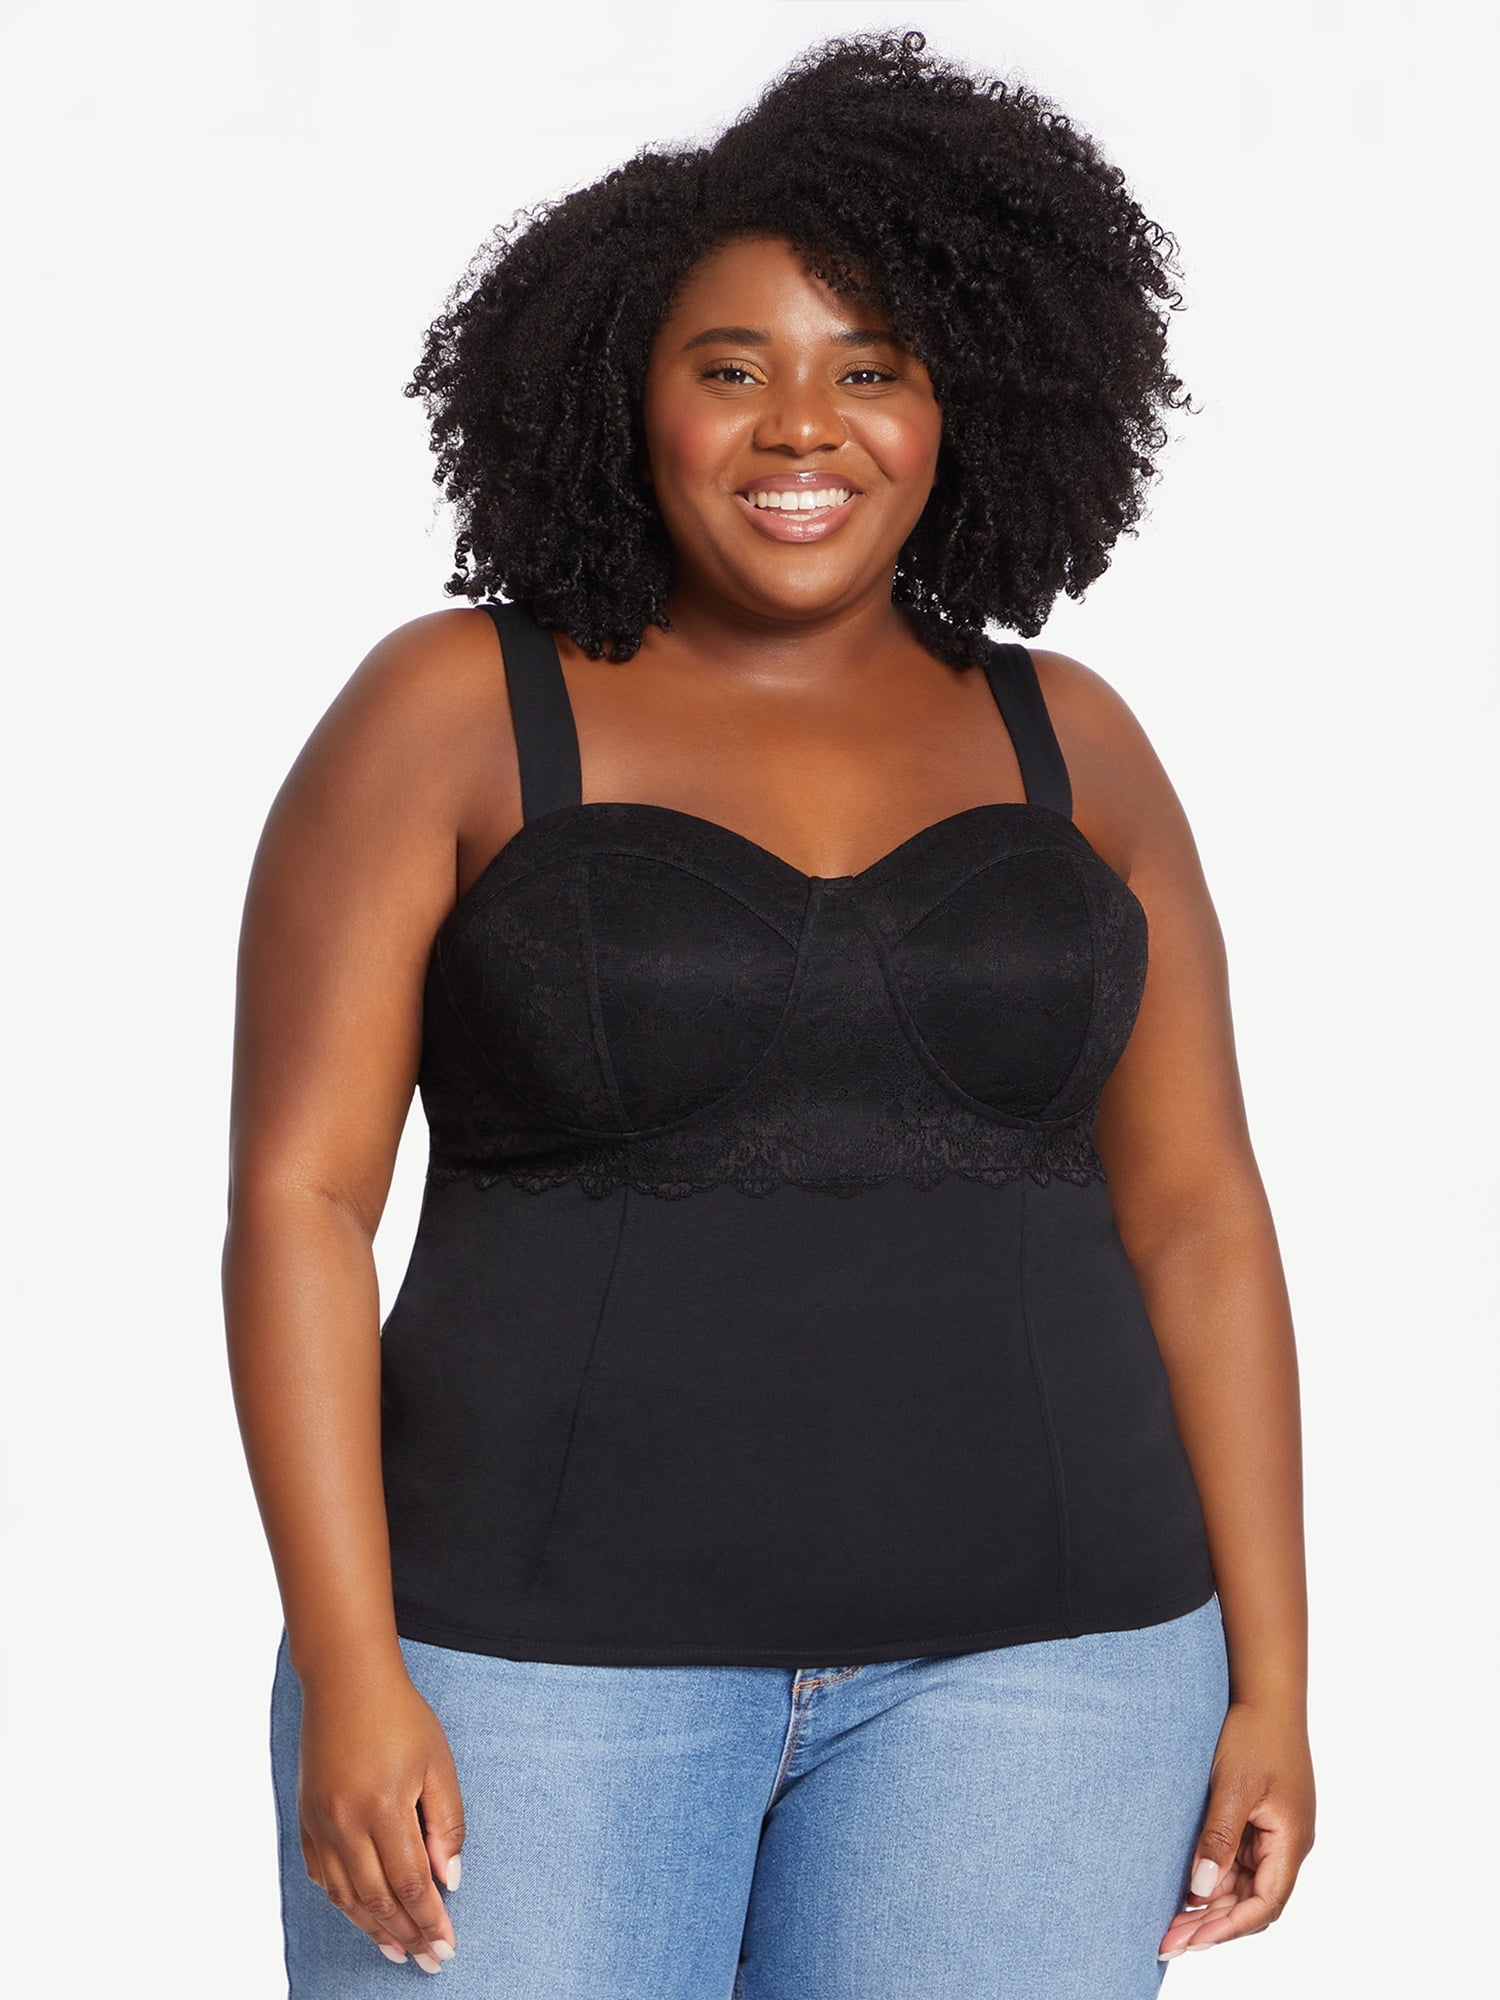 Sofia Jeans by Sofia Vergara Plus Size Bustier Top with Lace Detail